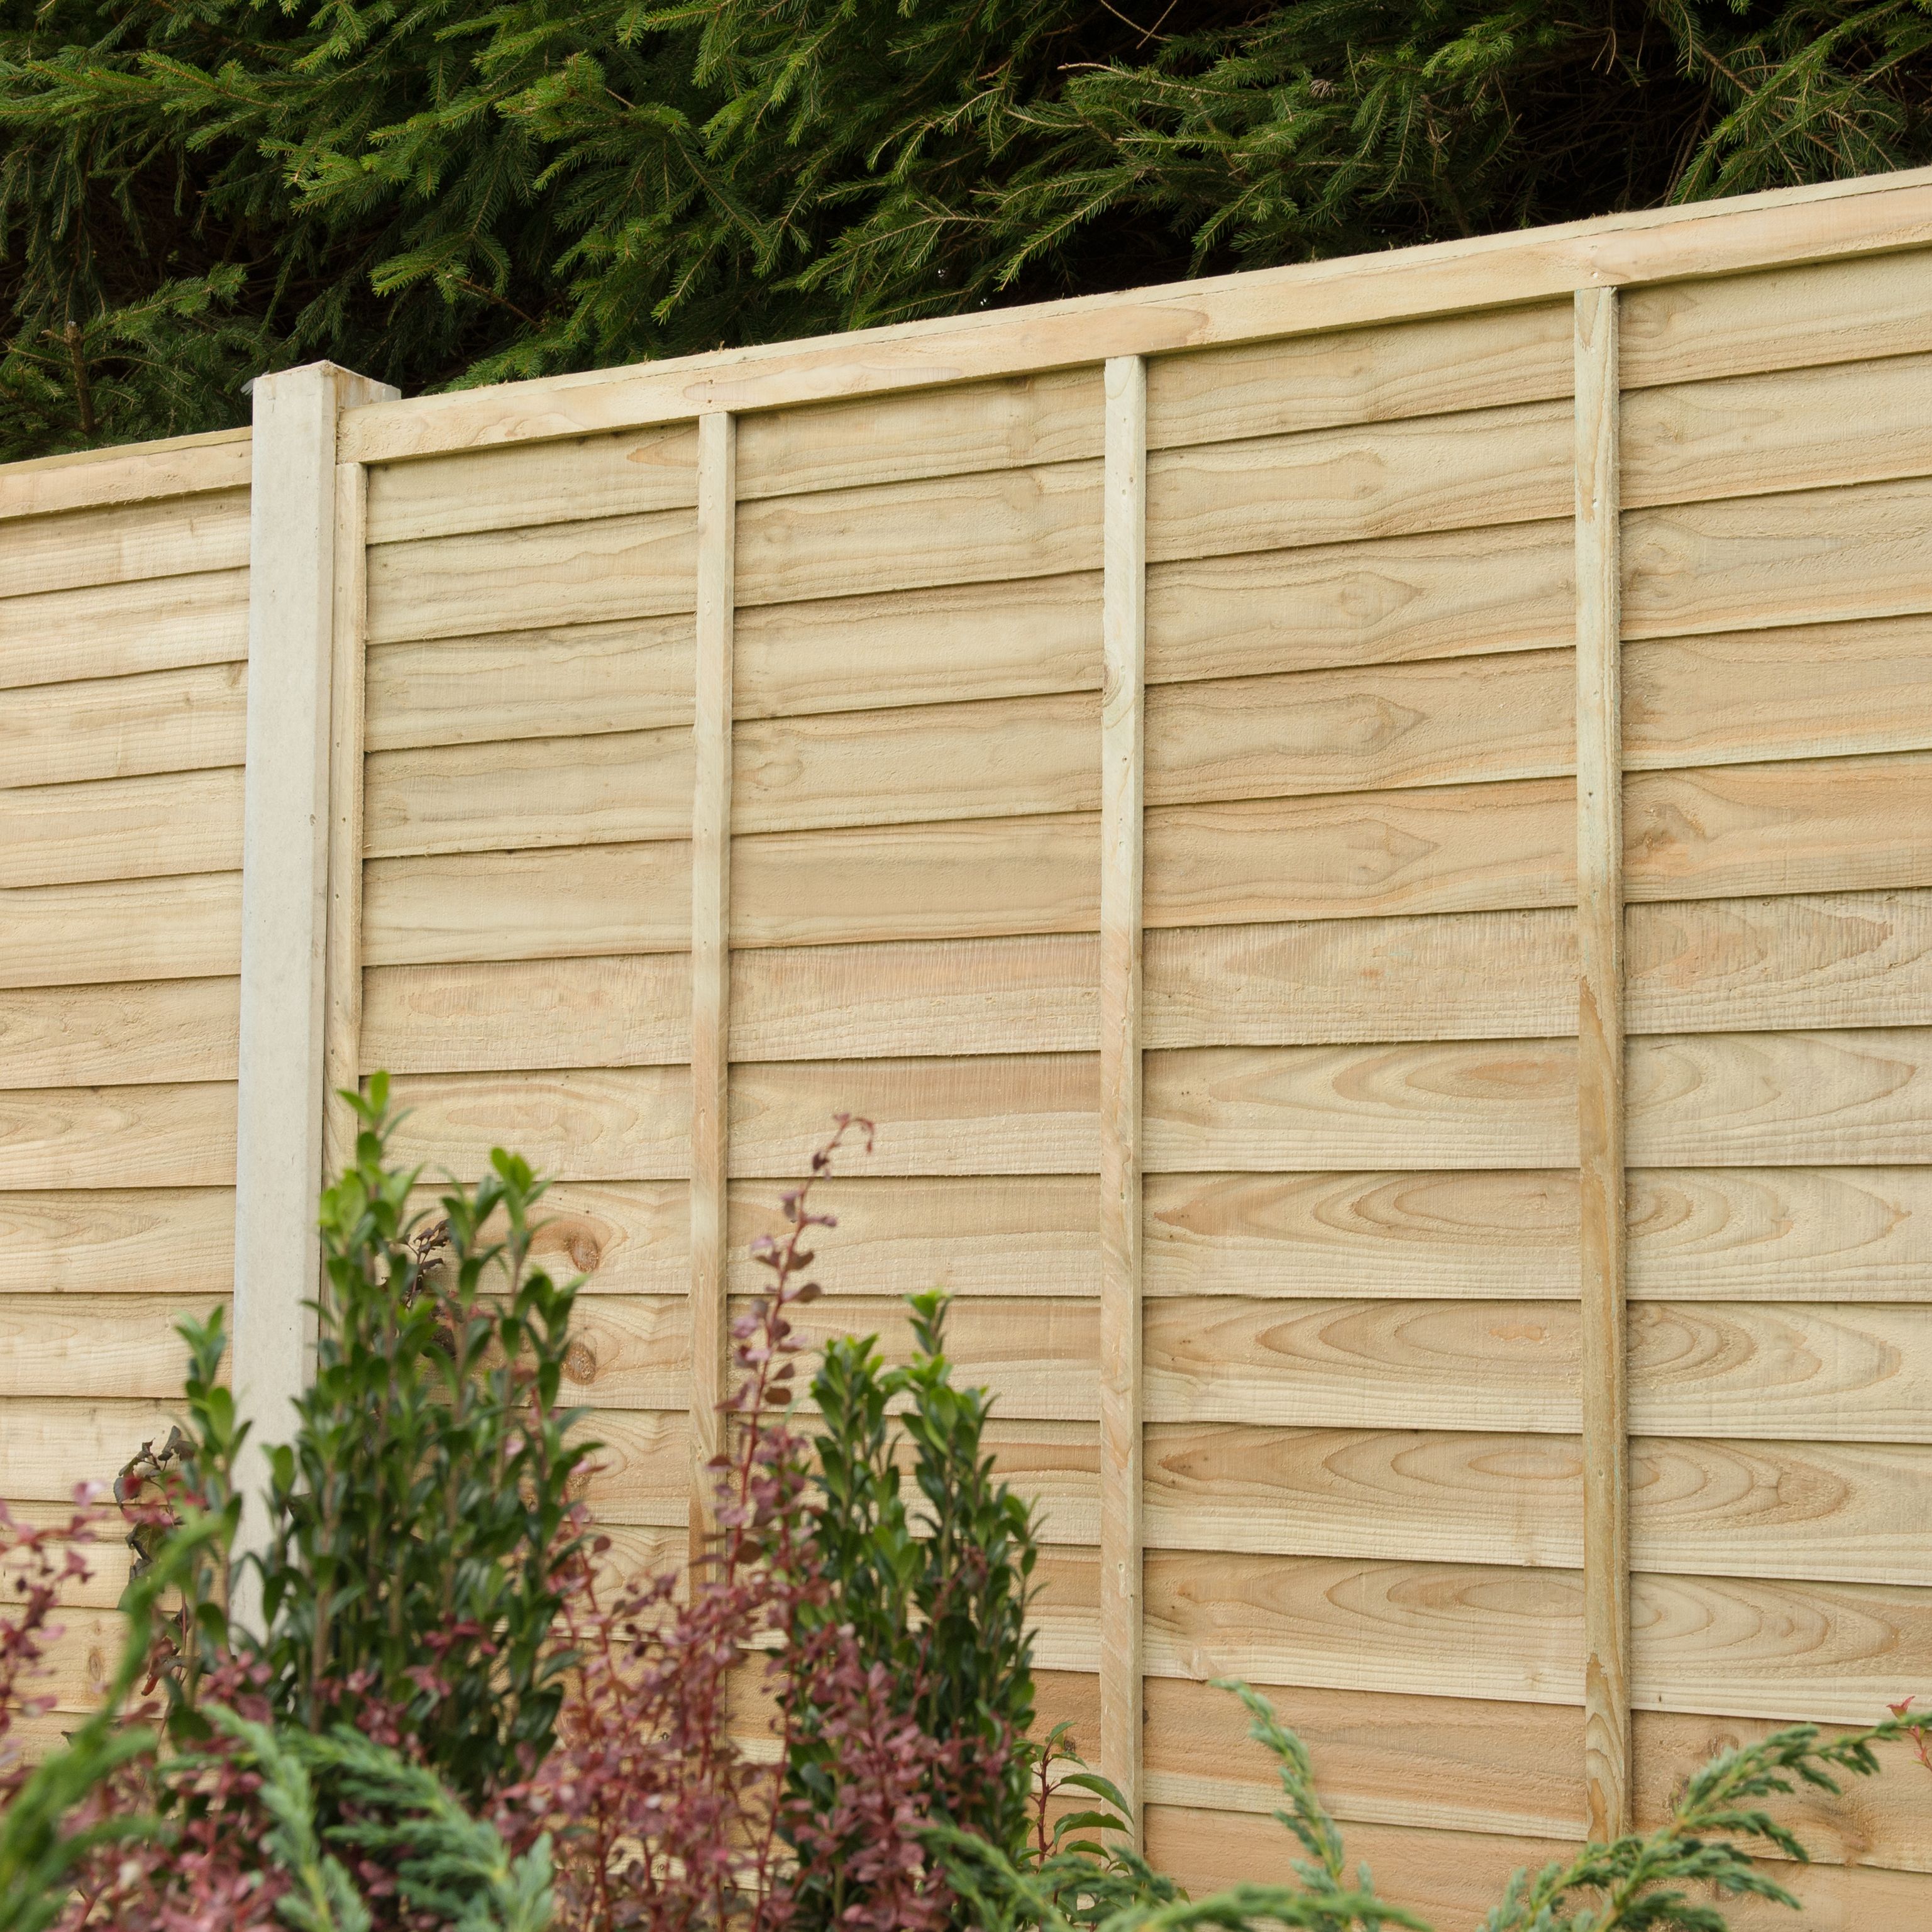 Premier Overlap Lap Pressure treated 6ft Wooden Fence panel (W)1.83m (H)1.83m, Pack of 3